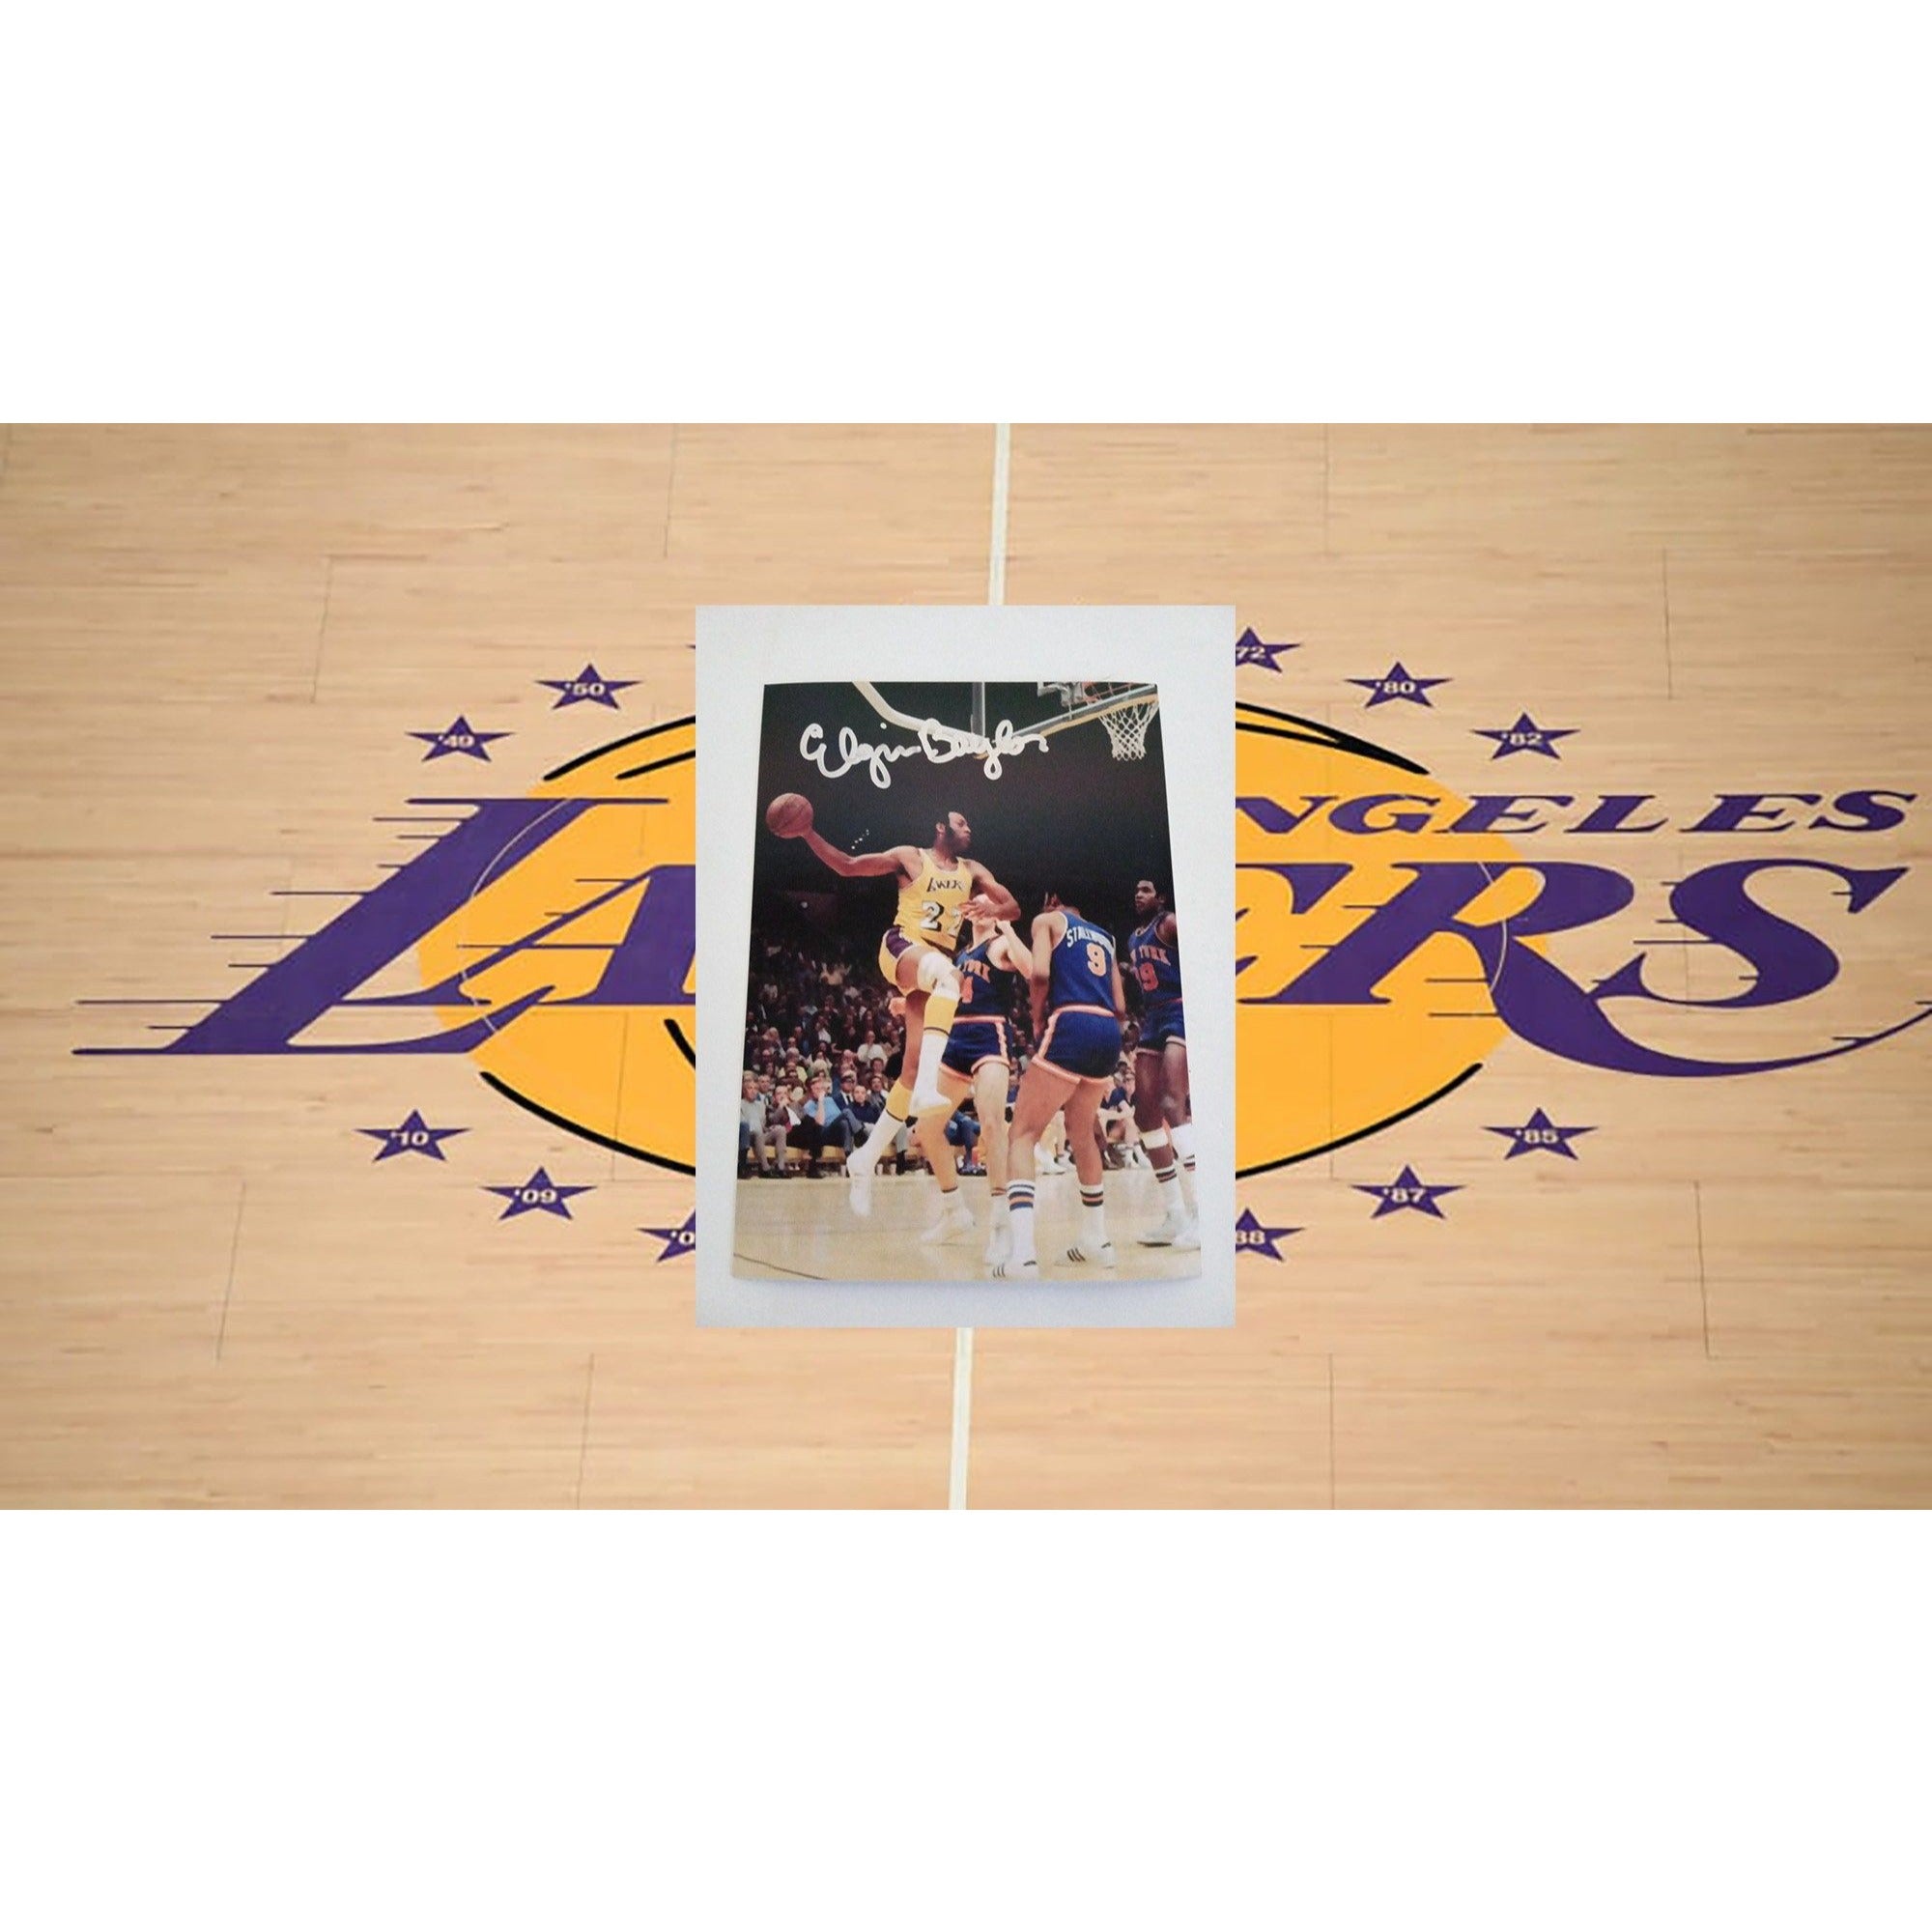 Elgin Baylor Los Angeles Lakers 5x7 signed photo with proof